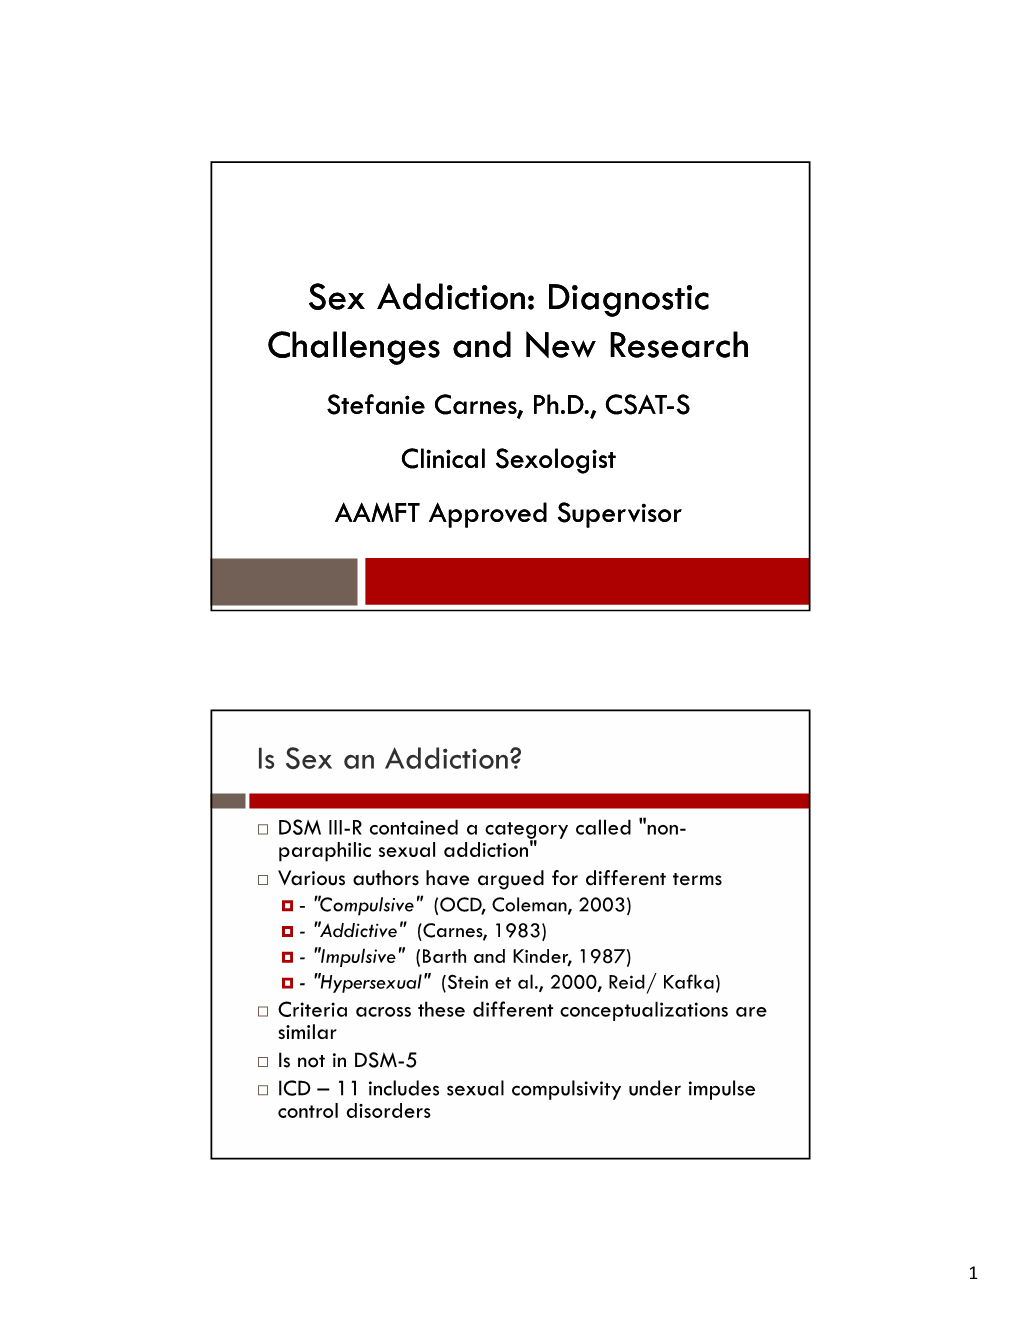 Sex Addiction: Diagnostic Challenges and New Research Stefanie Carnes, Ph.D., CSAT-S Clinical Sexologist AAMFT Approved Supervisor